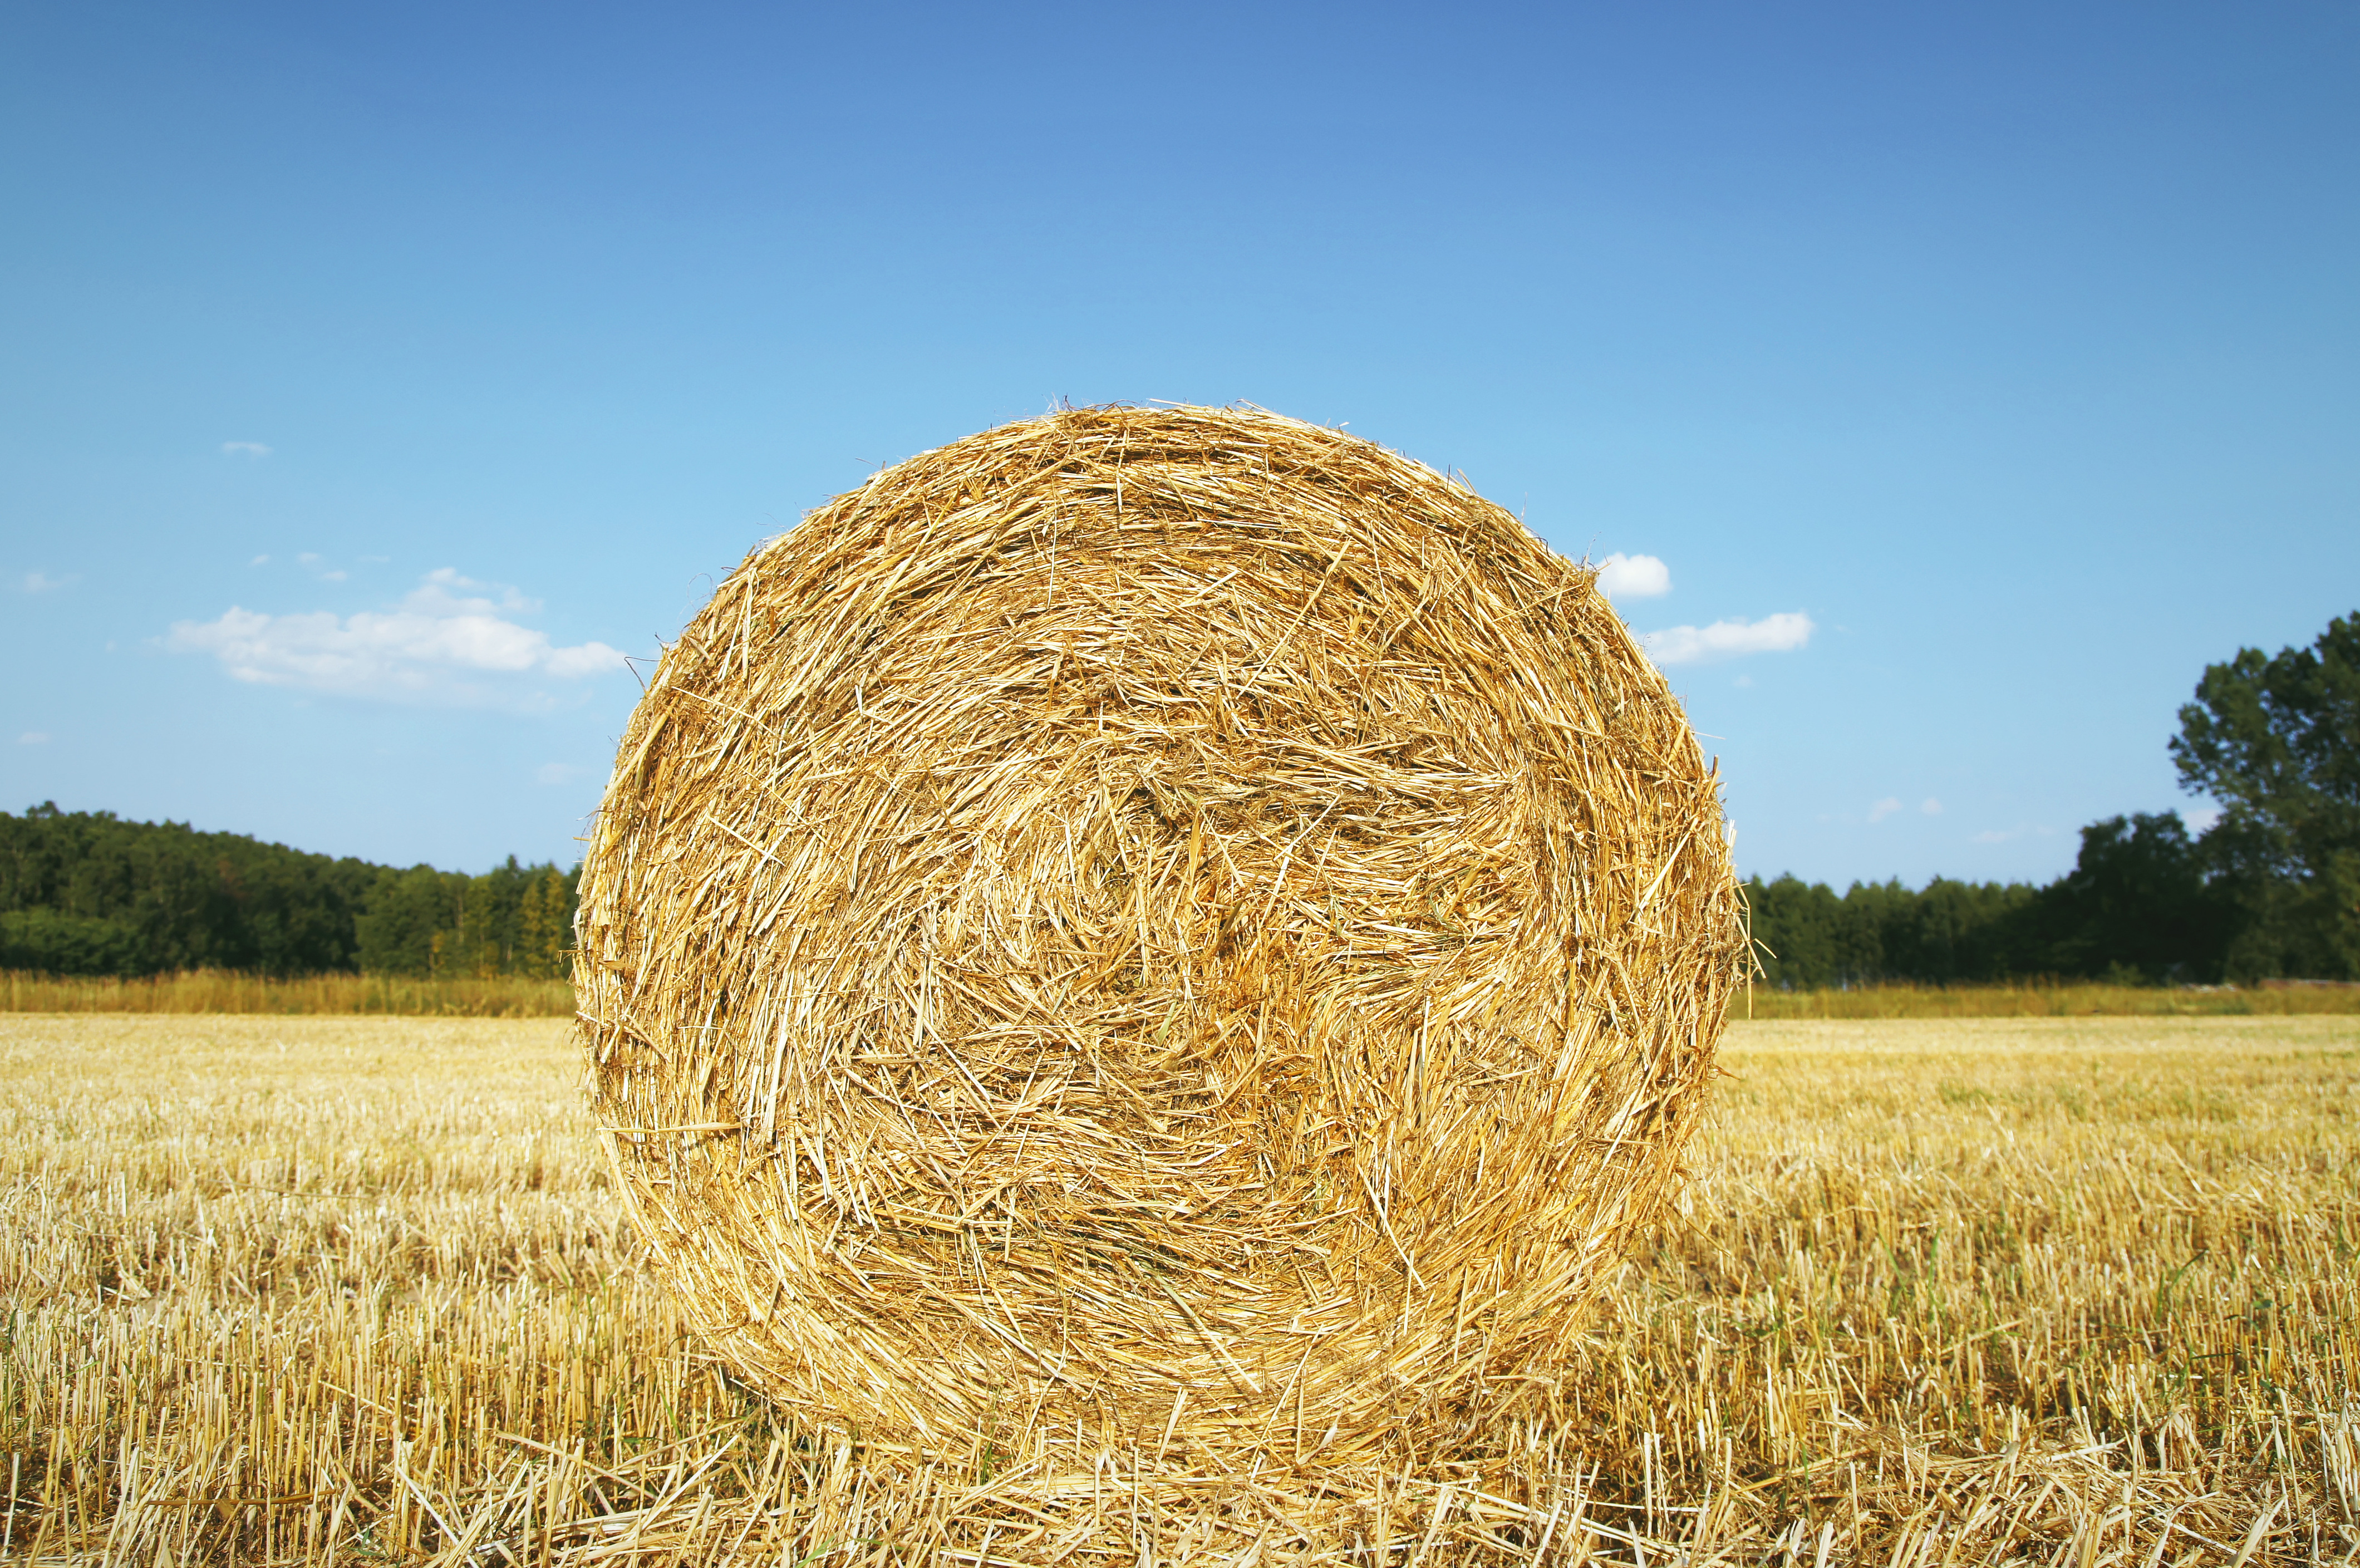 Straw bales on field - Our Great Photos